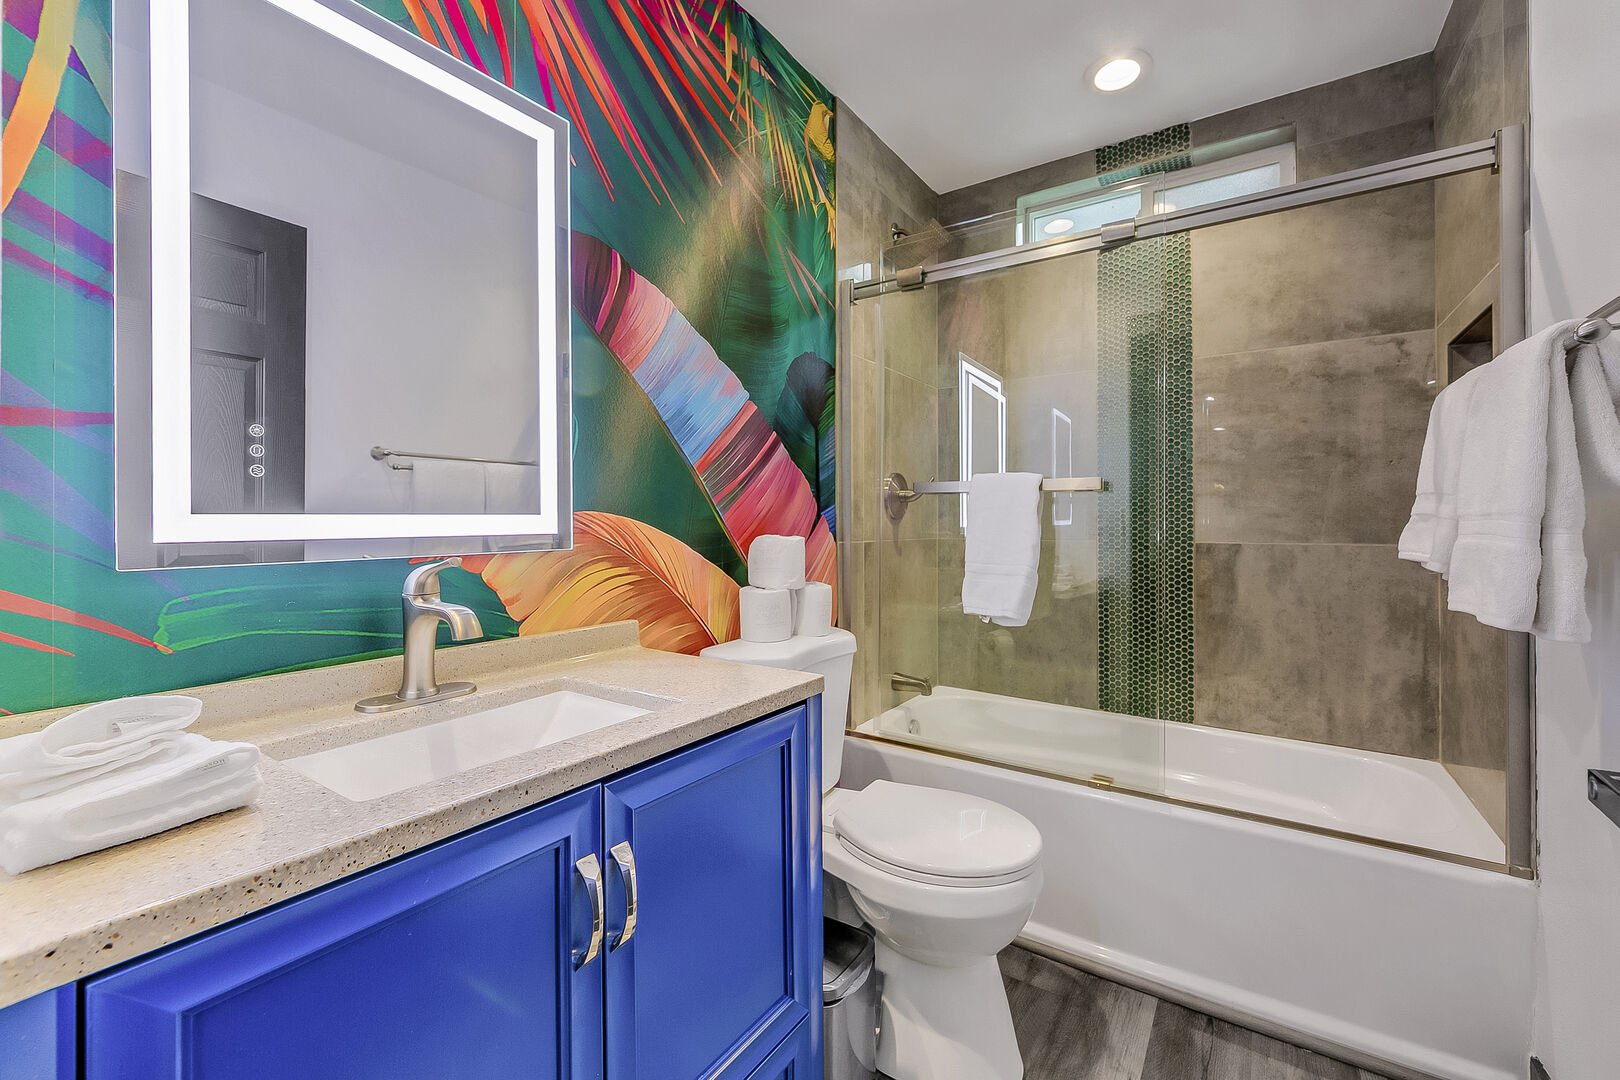 The private, en suite bathroom features a bathtub and shower combo, along with a vanity sink.